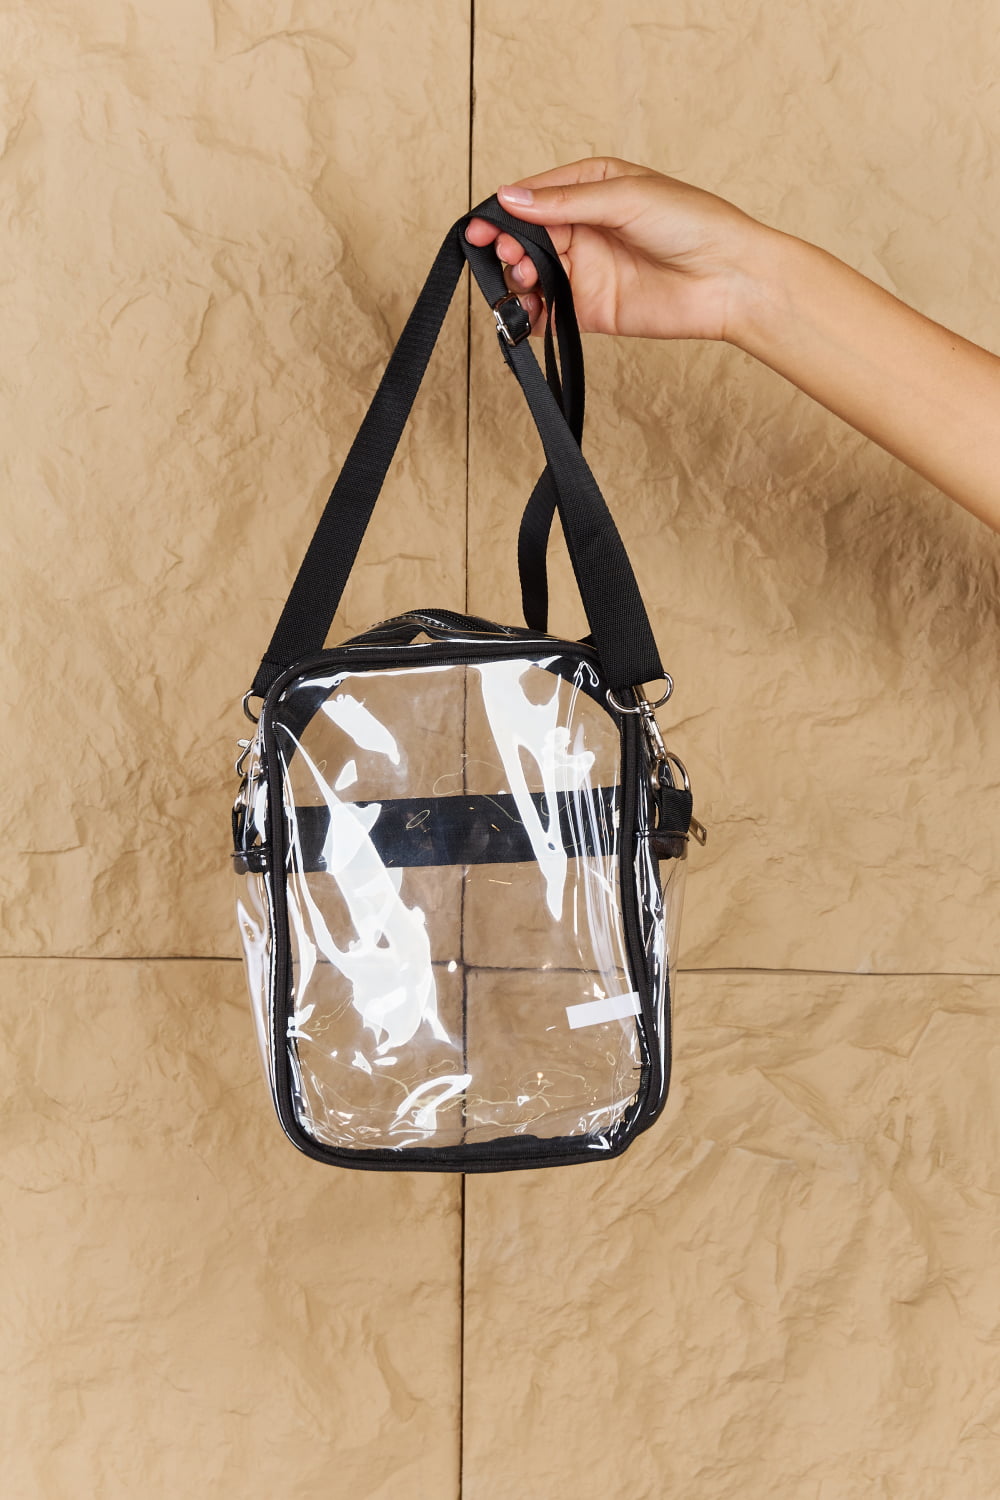 Fame Striped in The Sun Faux Leather Trim Tote Bag